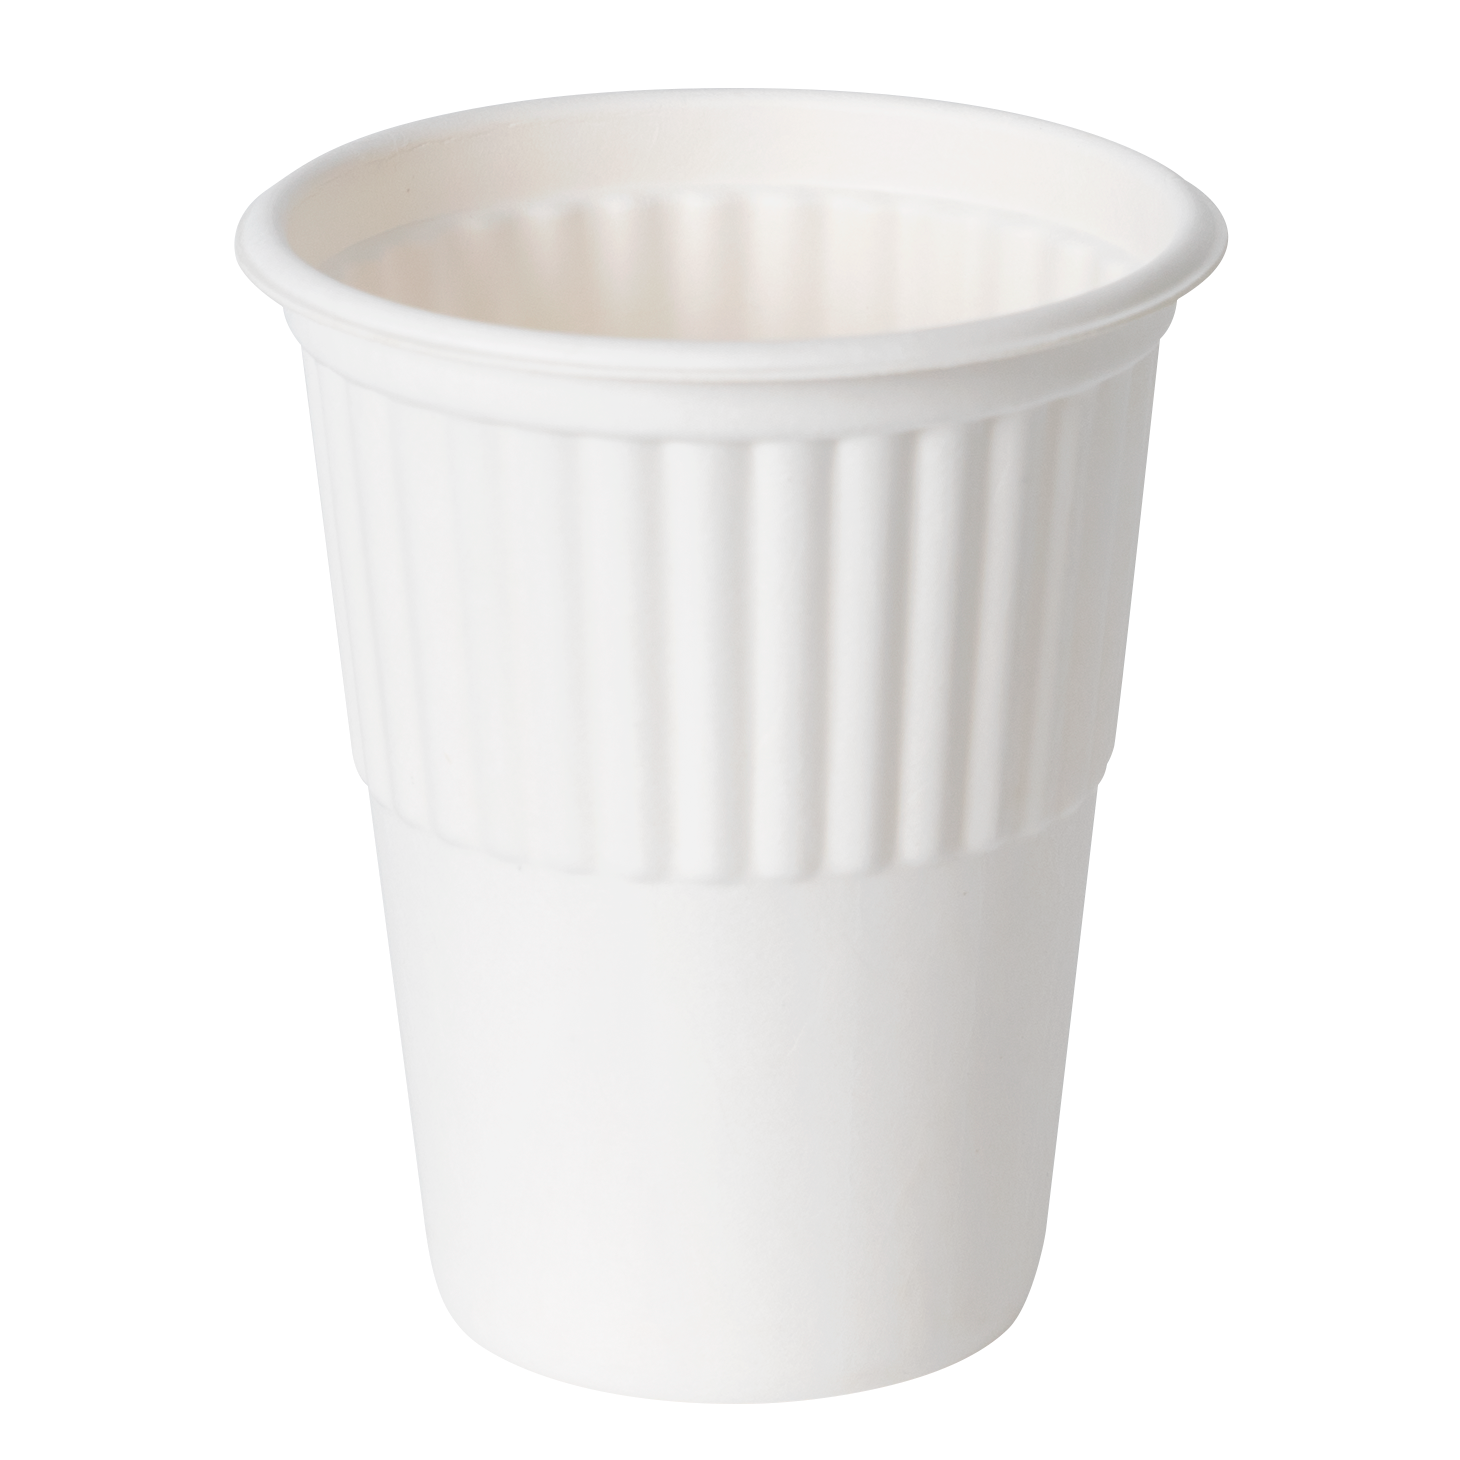 8oz sugarcane 100% Home Compostable Cup Featured Image